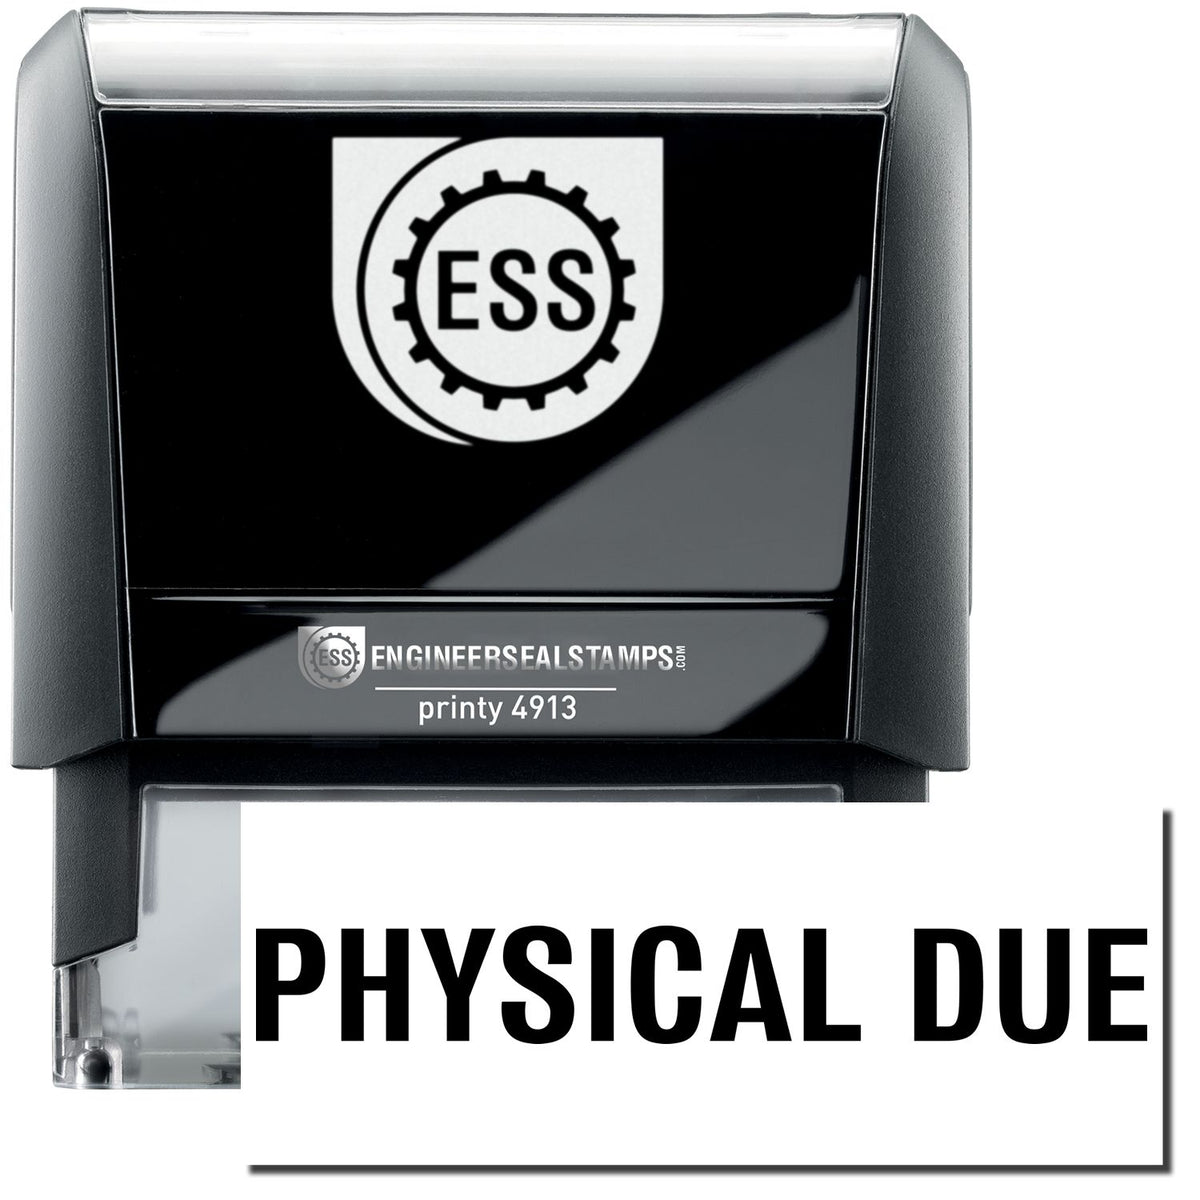 A self-inking stamp with a stamped image showing how the text &quot;PHYSICAL DUE&quot; in a large bold font is displayed by it after stamping.